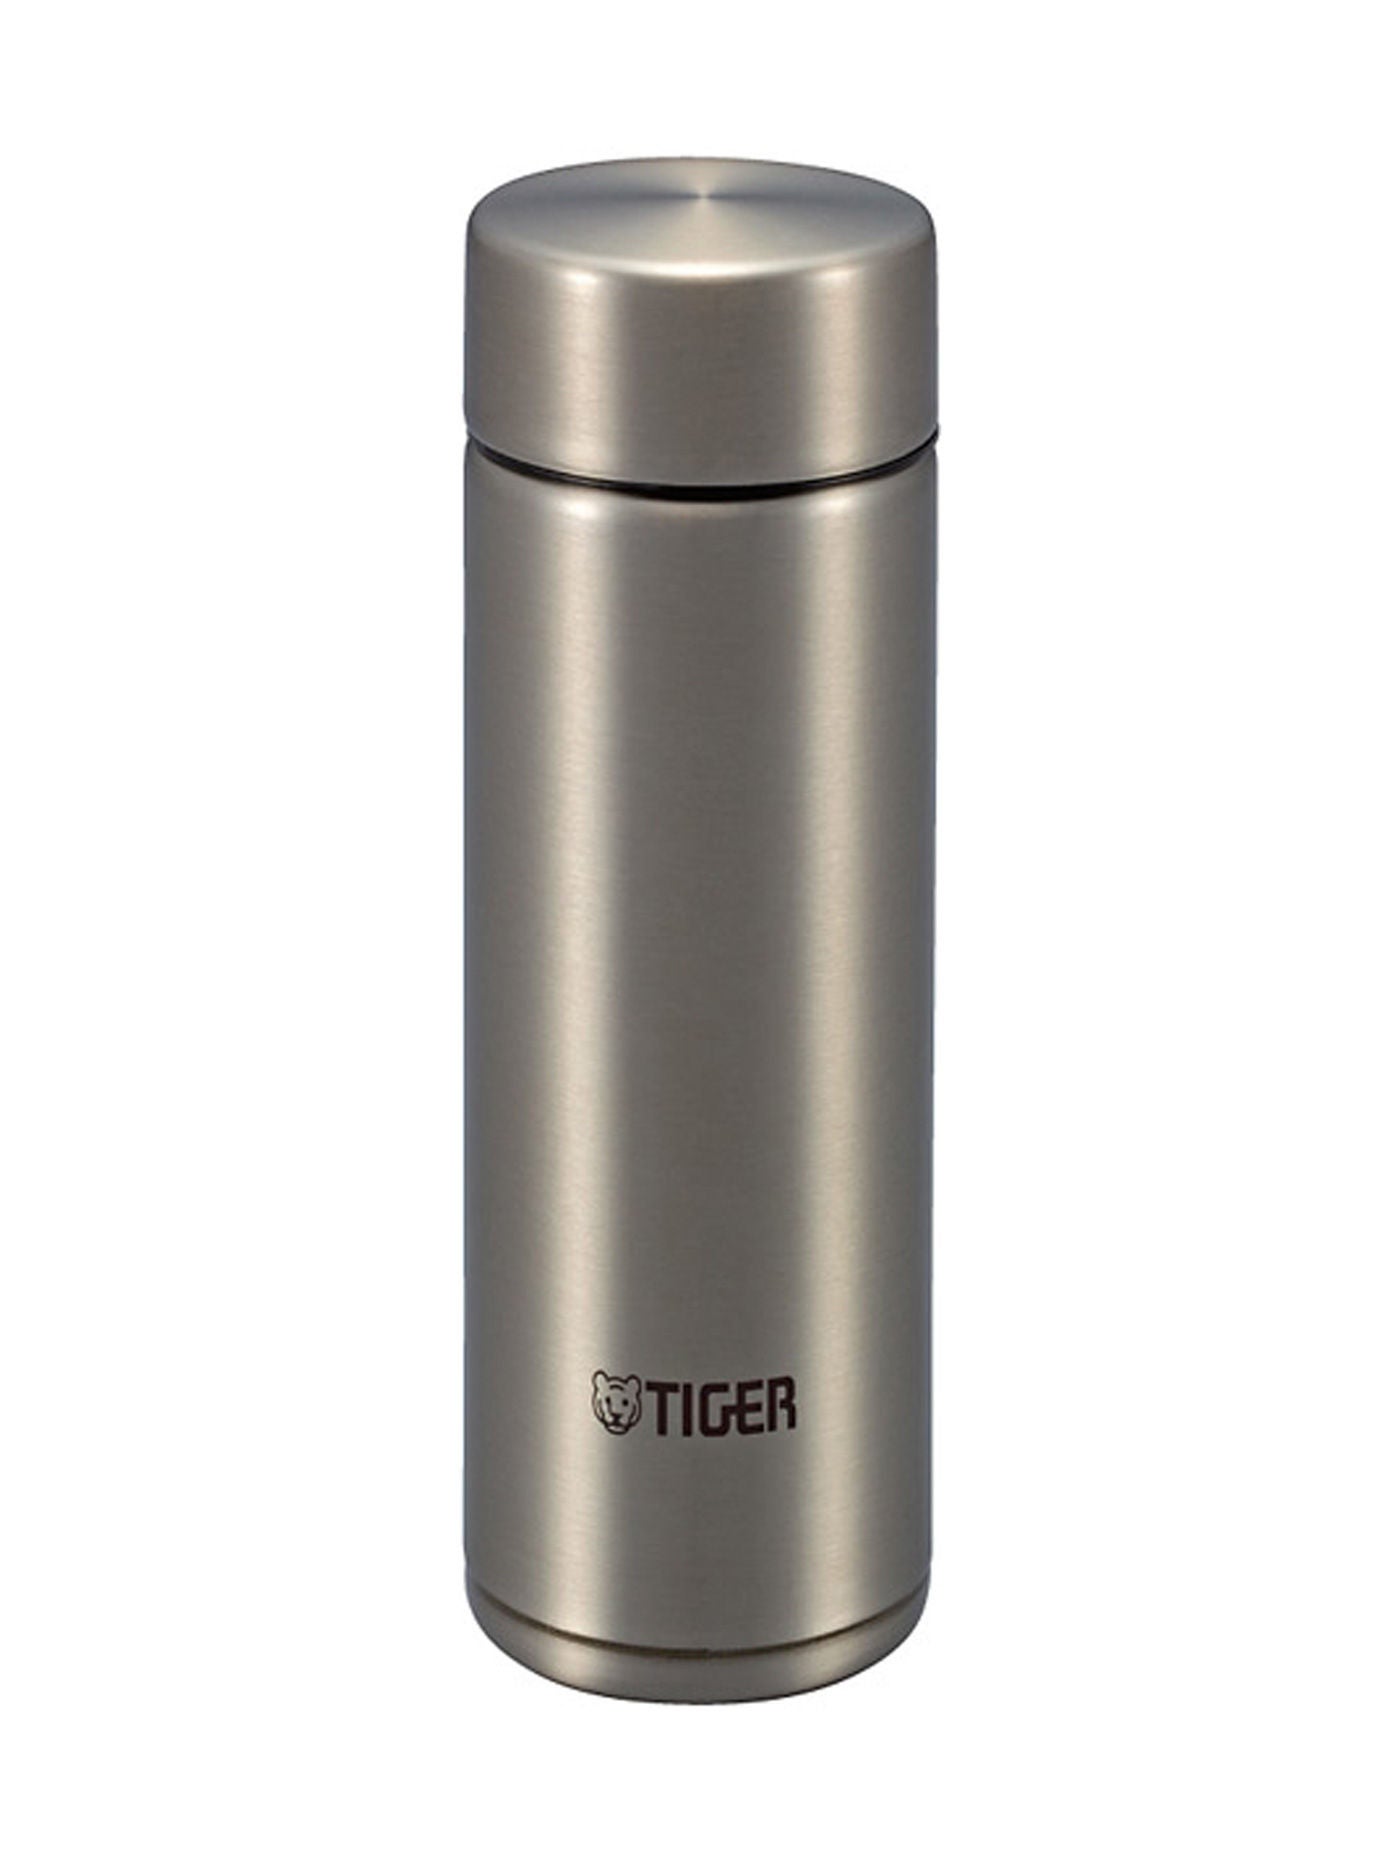 40.0% OFF on TIGER Vacuum Insulated Tumbler 0.3 L Silver